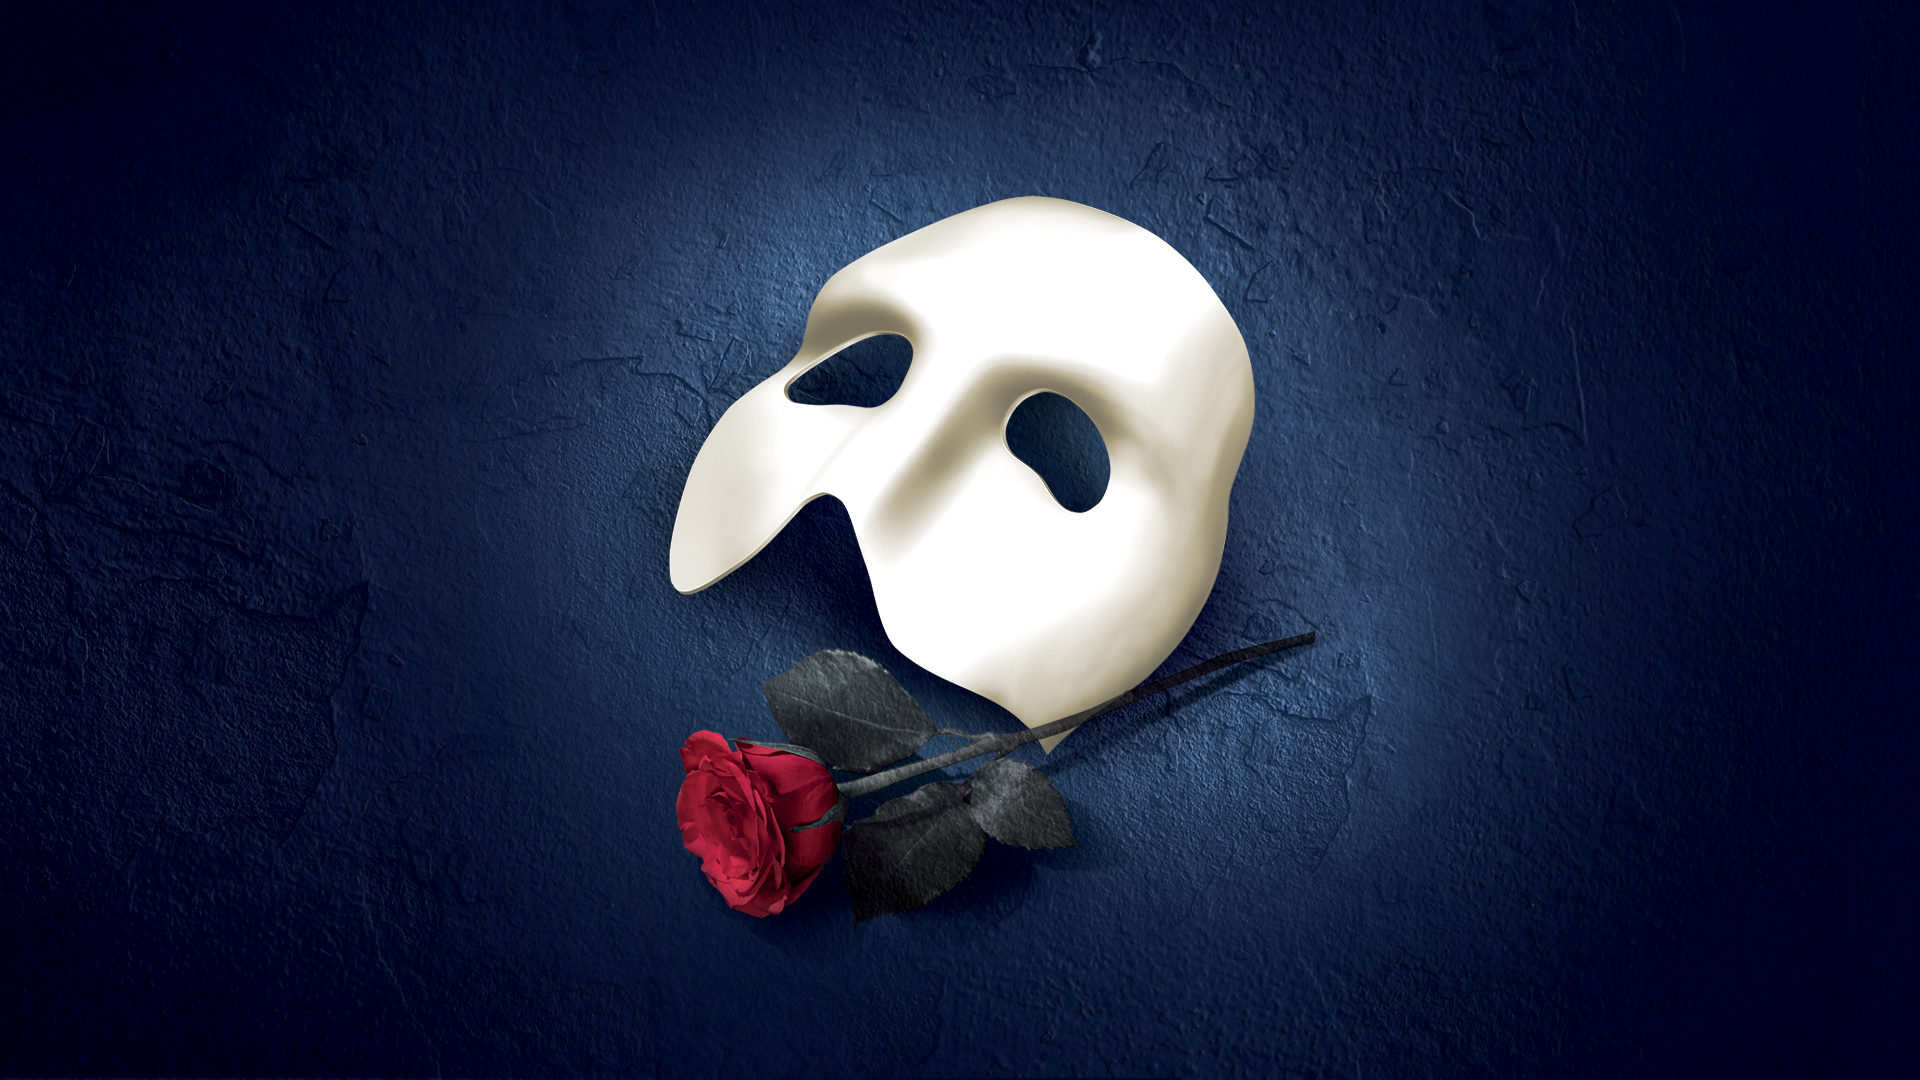 Phantom Of The Opera Wallpapers - Share the best gifs now